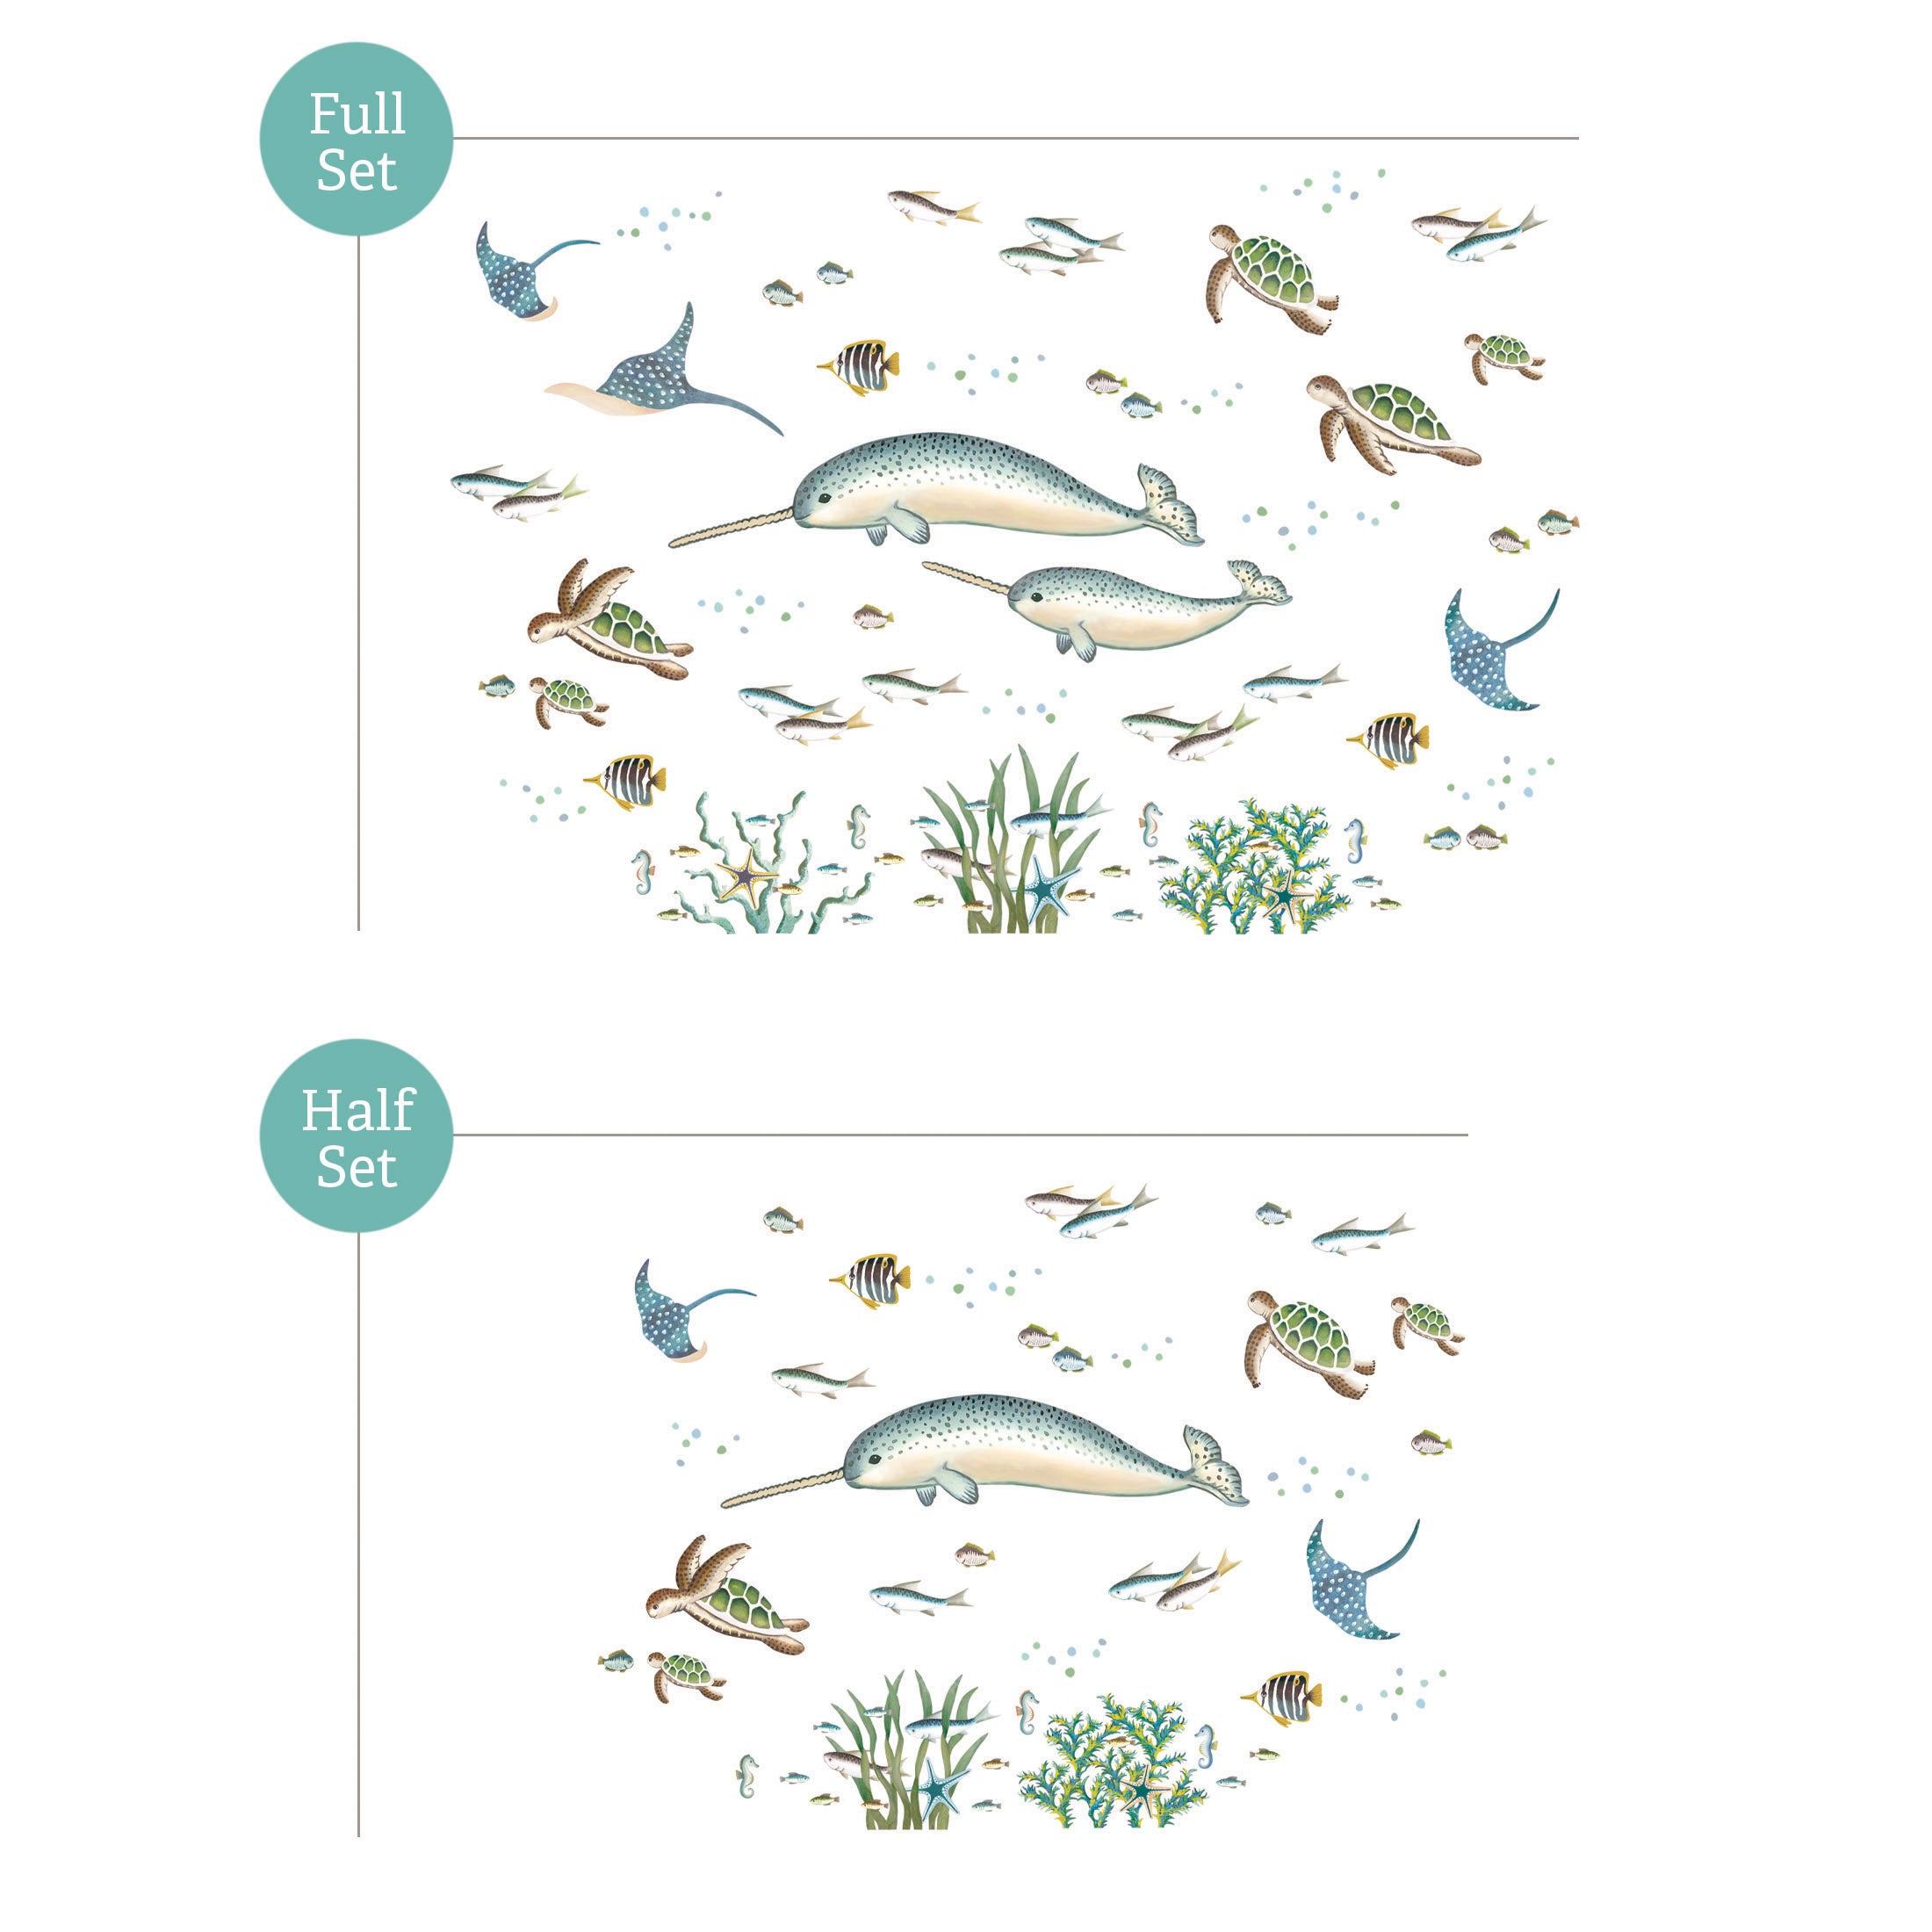 Narwhal, Sea Turtle and Fish ~ Ocean Scene Fabric Wall Sticker 